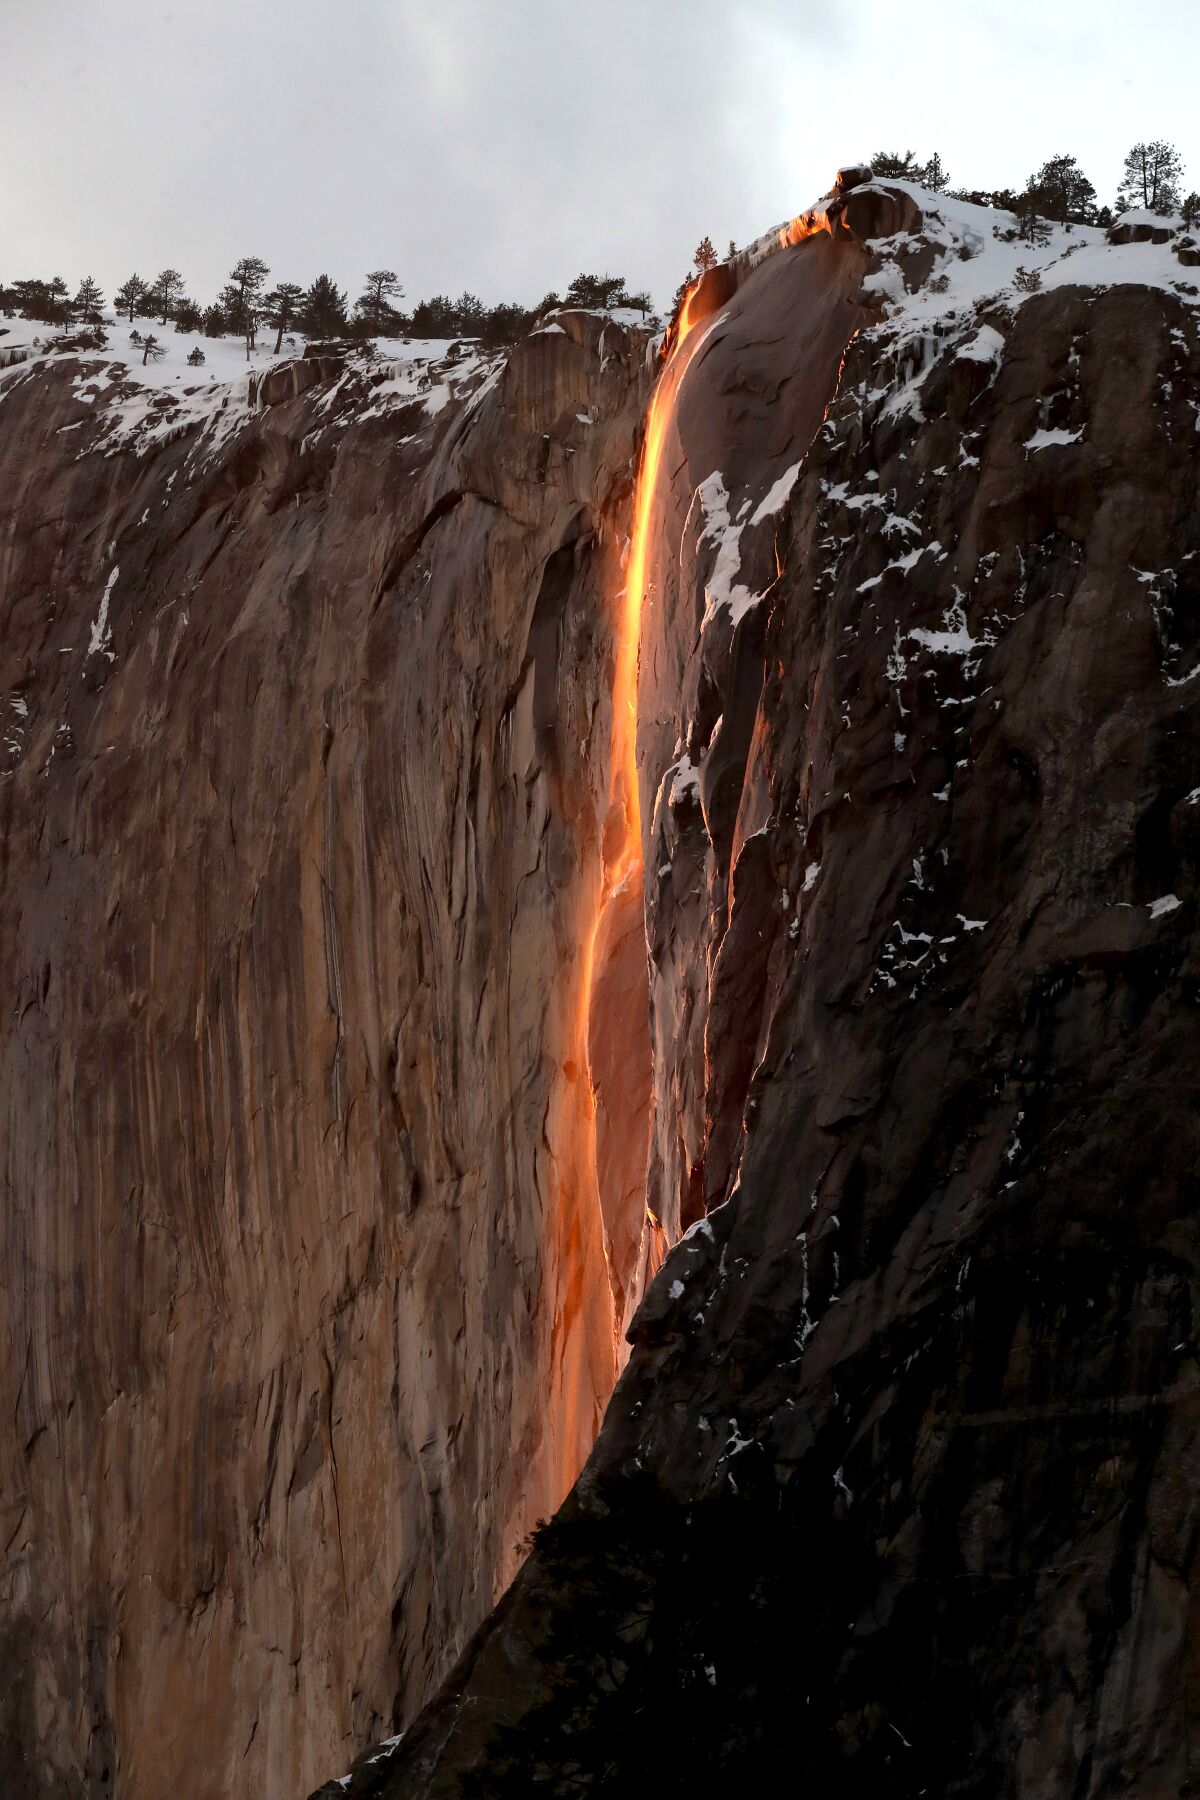 The "firefall" effects is caused by light from the setting sun on Yosemite's Horsetail Fall.